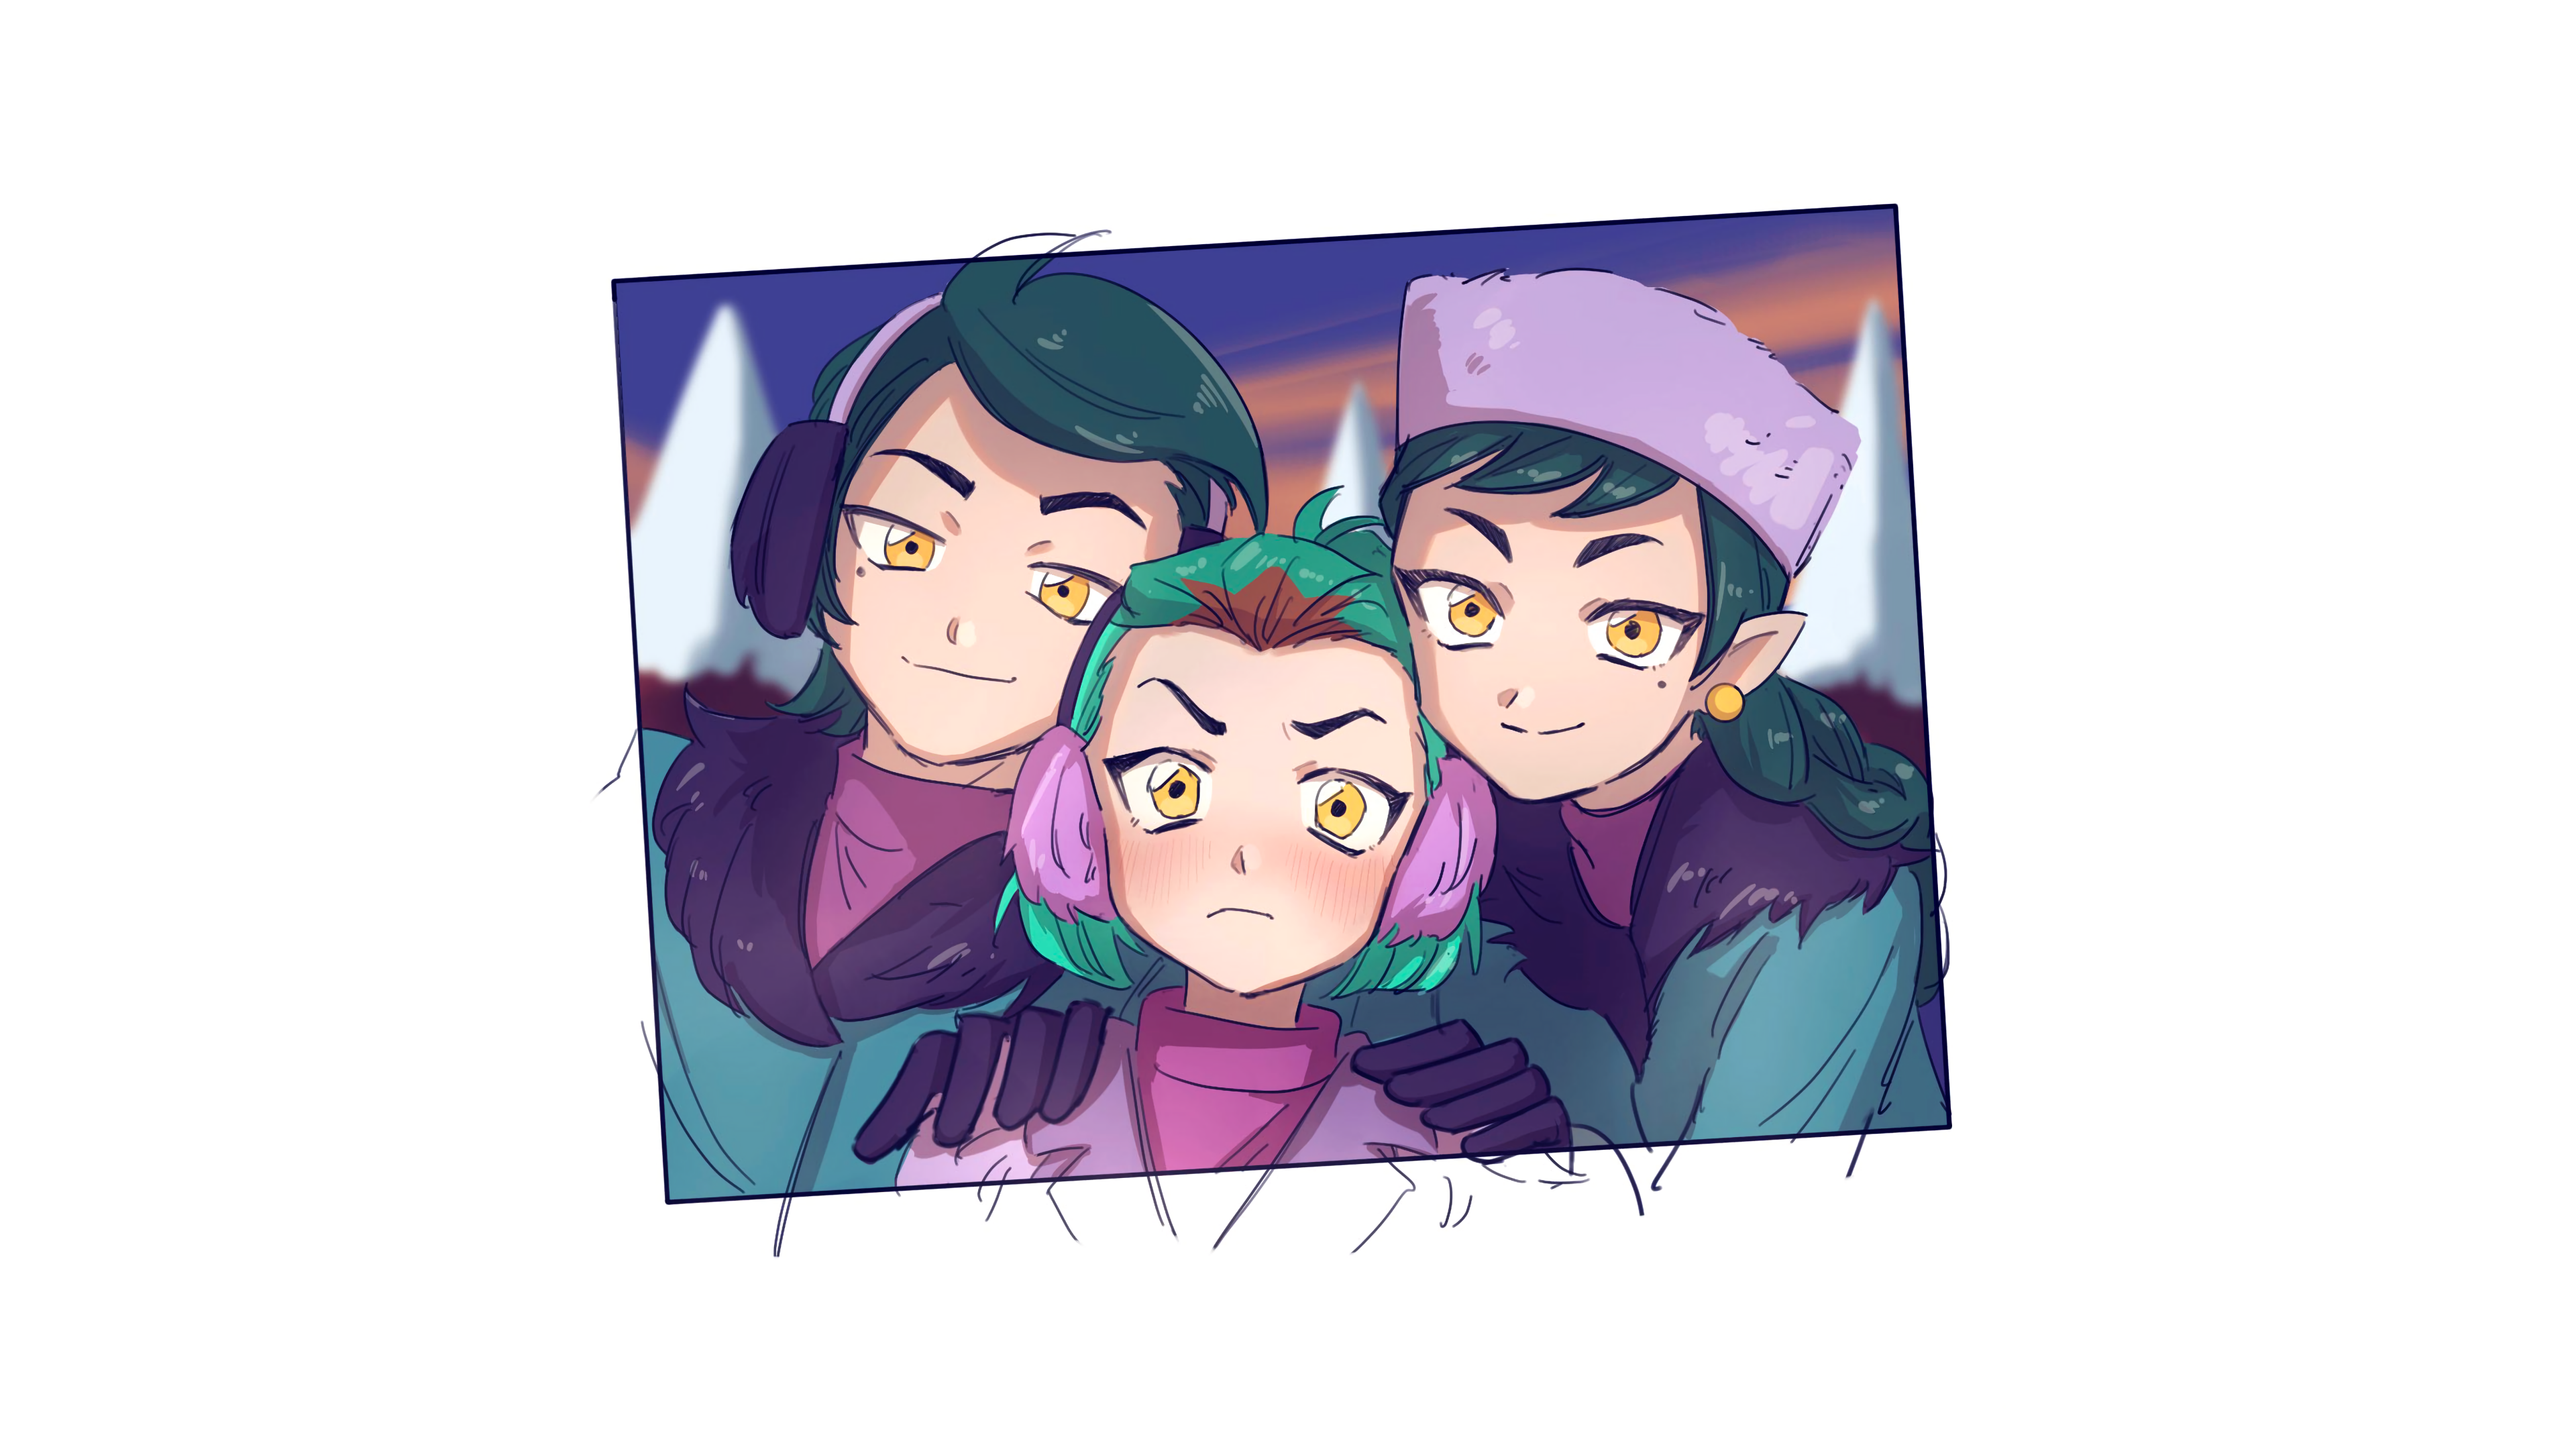 General 3840x2160 The Owl House Amity Blight Emira Blight Eldric Blight ear muffs hat fluffy hat winter jacket winter snow blushing cartoon green hair short hair long hair brothers sisters earring yellow eyes embarrassed fan art pointy ears minimalism simple background white background